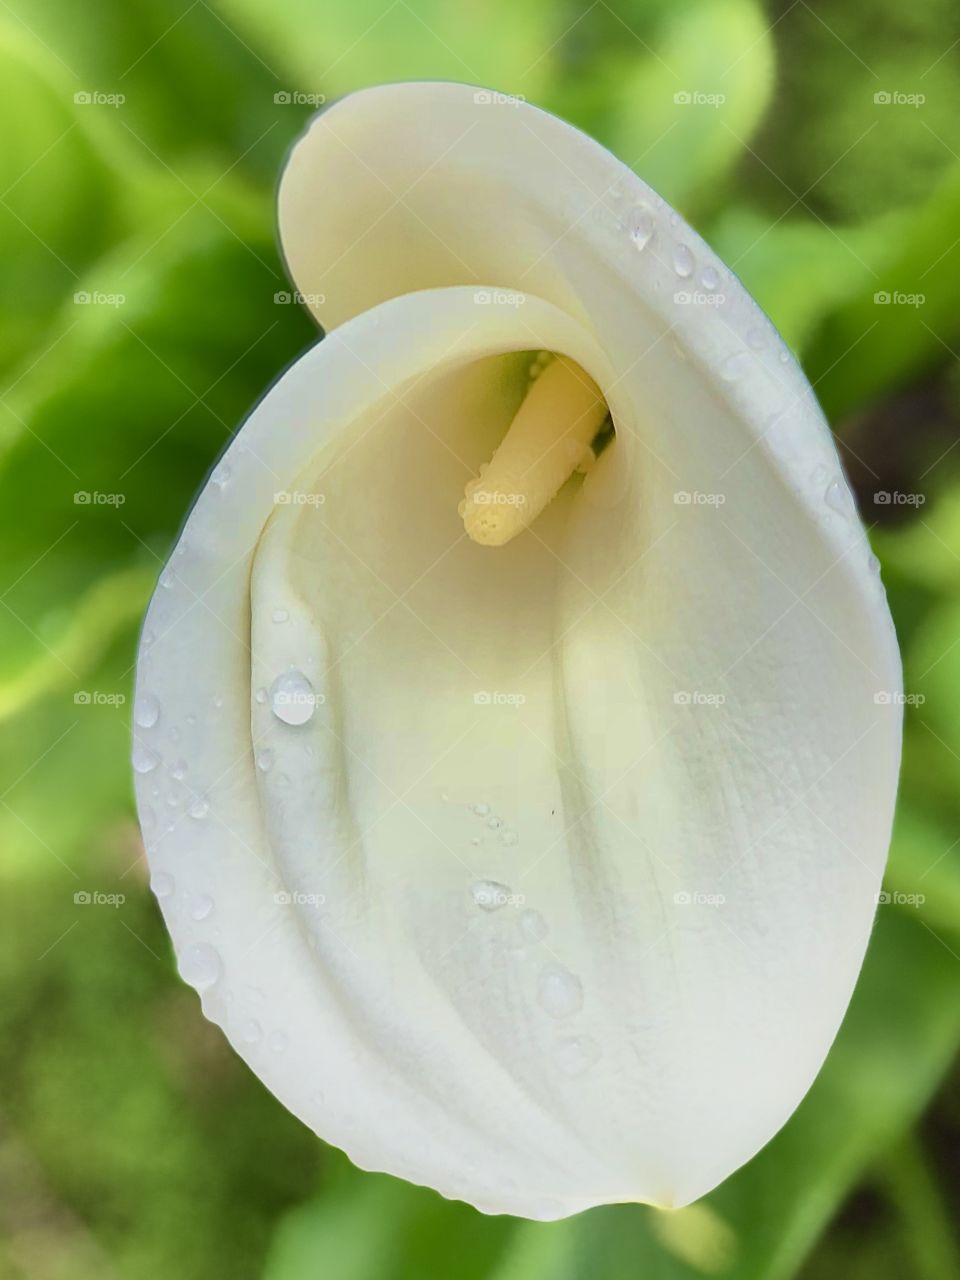 Foap Mission The Signs Of Spring! Beautiful First Spring Bloom Calla Lily With Morning Dew!